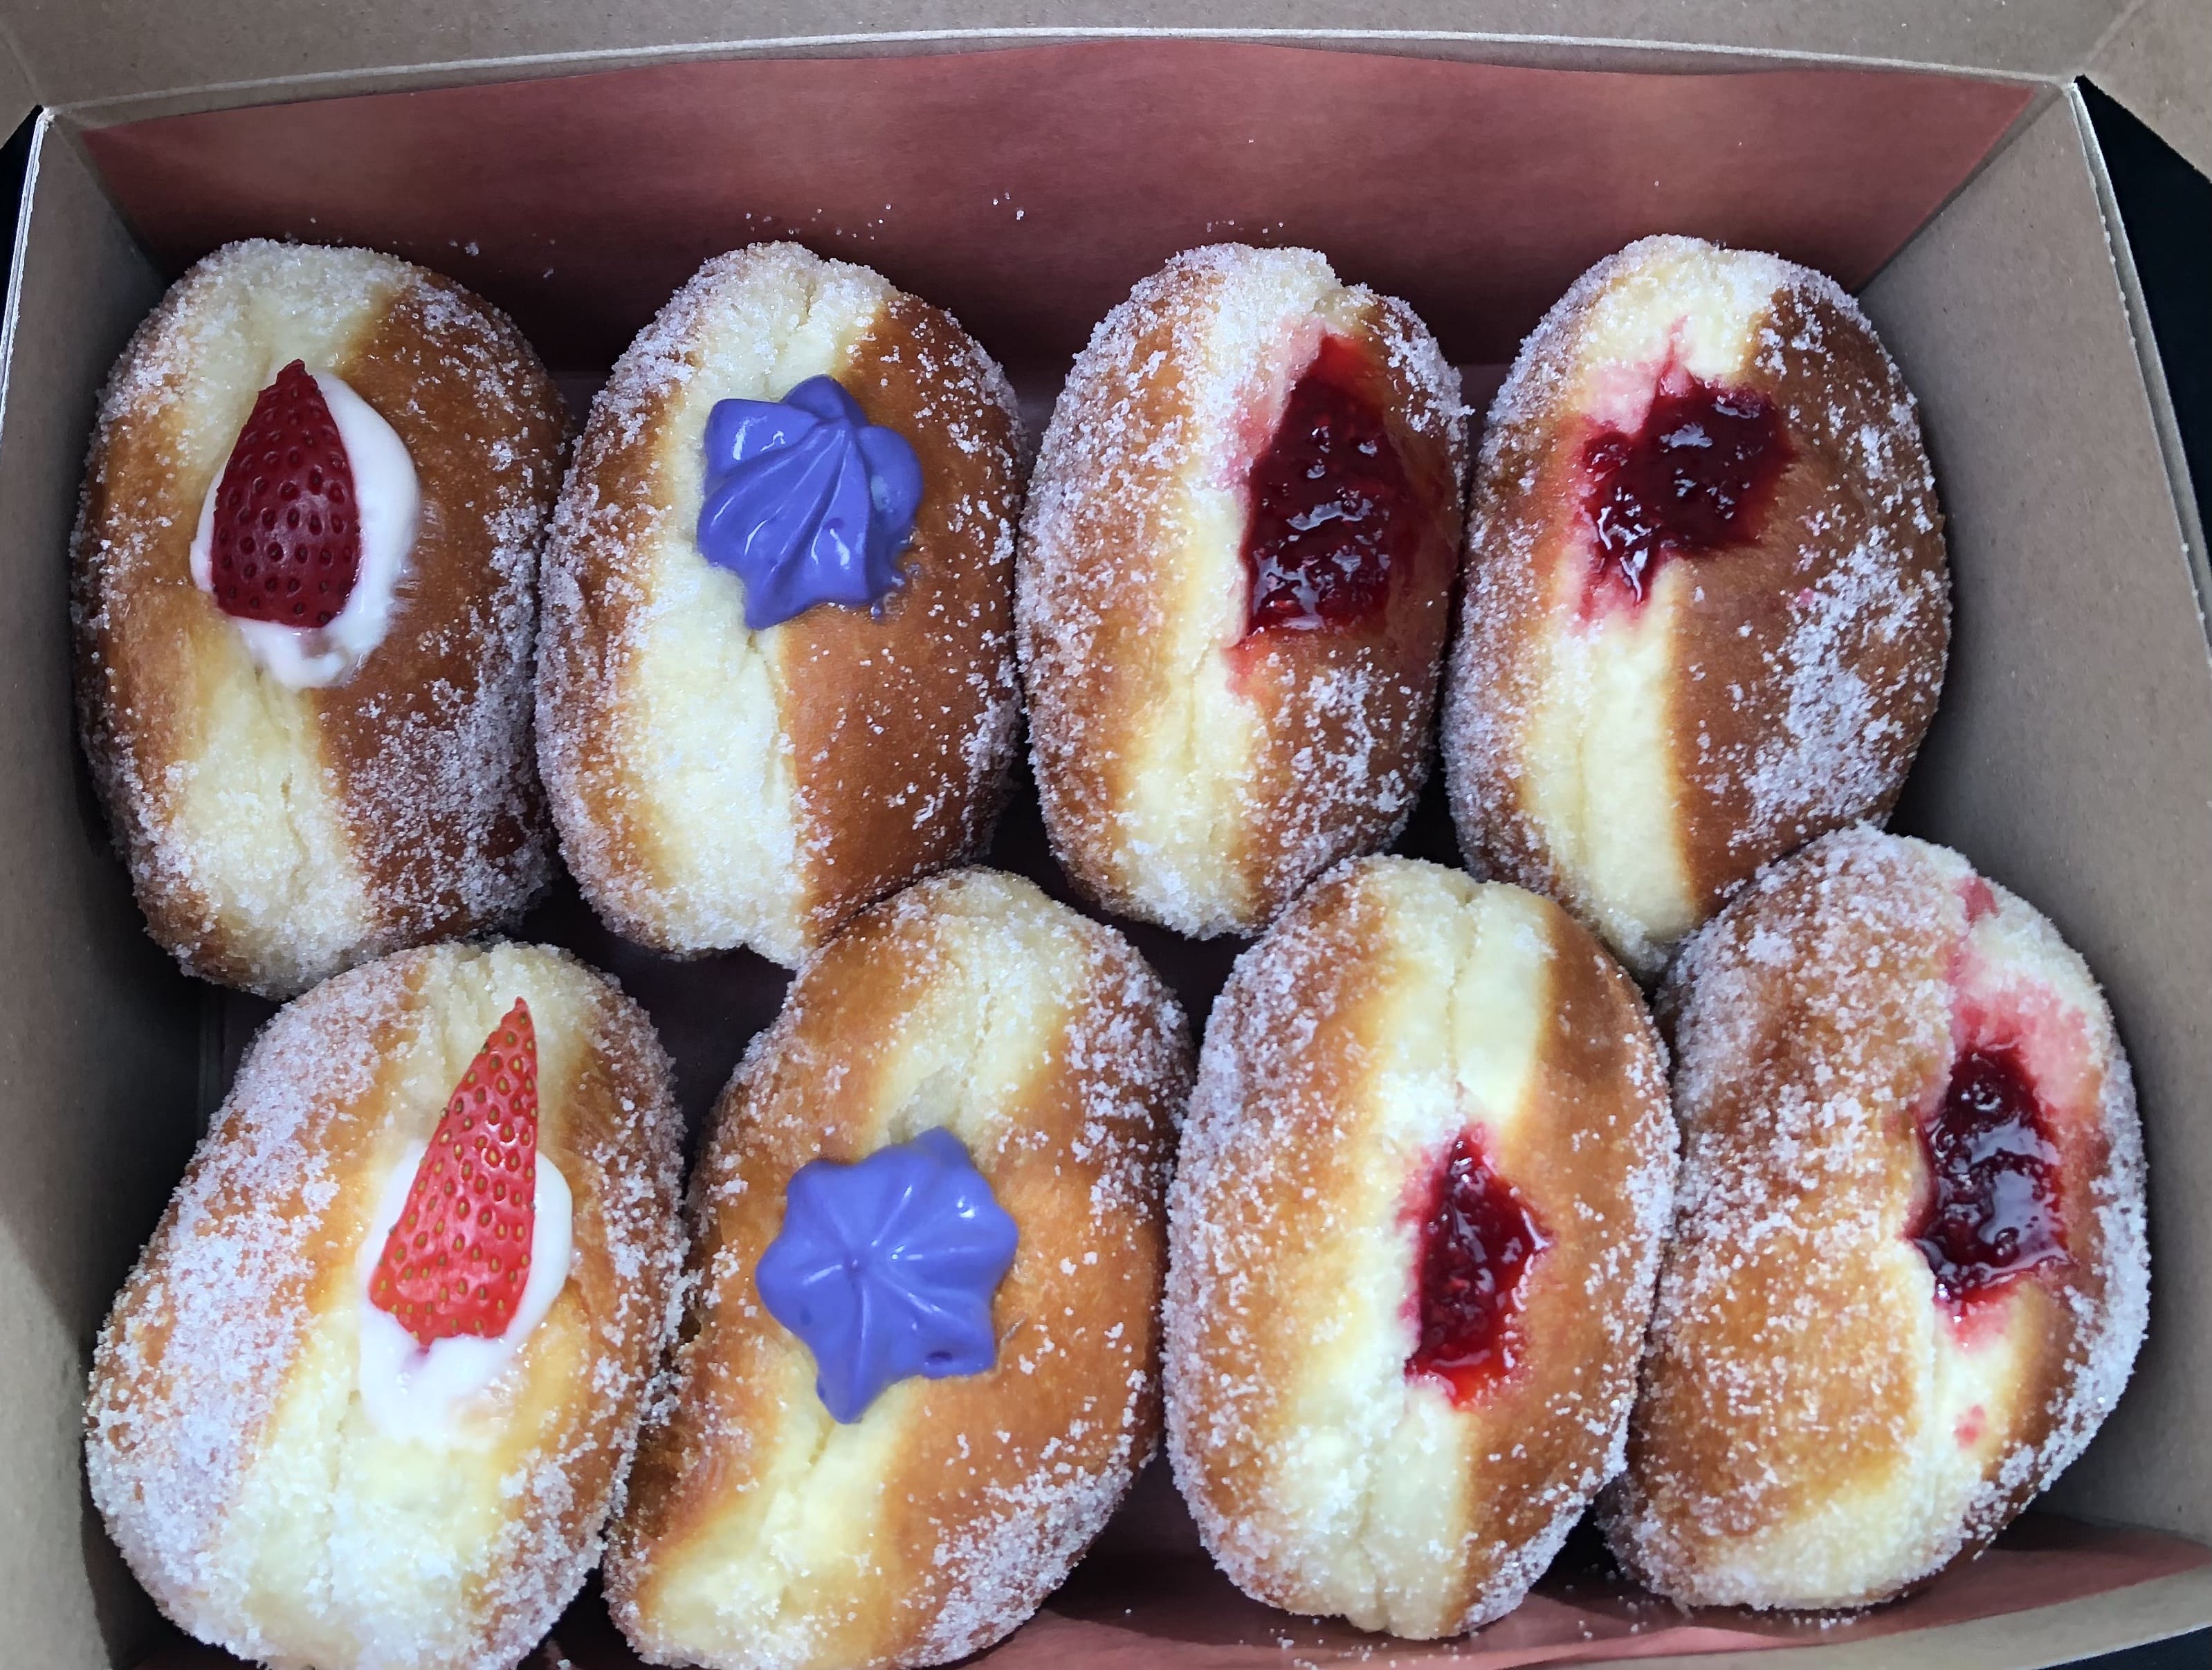 You are currently viewing A Hidden Calgary Gem with Deliciously Filled Doughnuts…Find Out How to Get Them